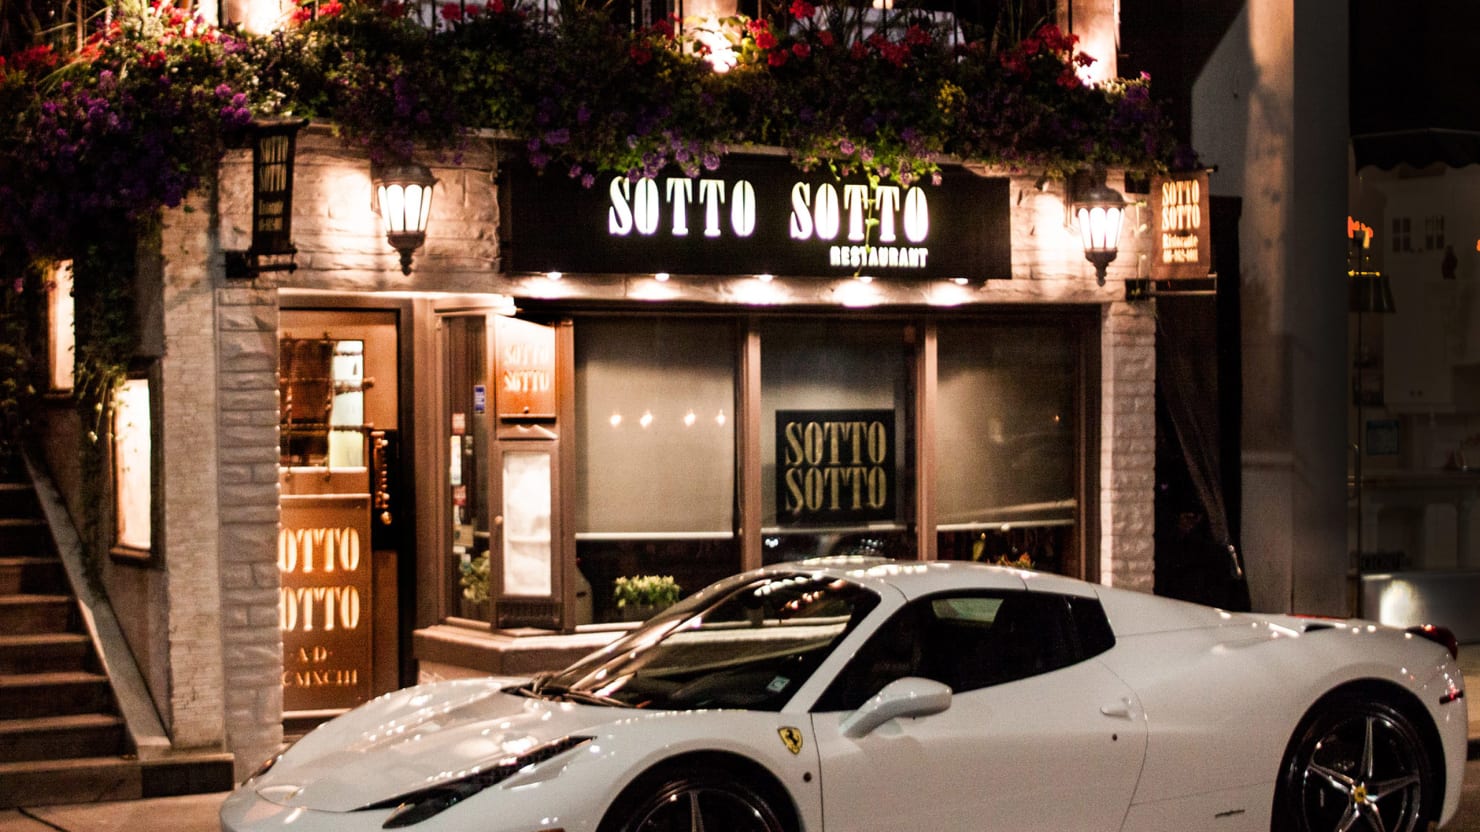 The Fiery Death of Sotto Sotto, Toronto’s Celebrity Hotspot